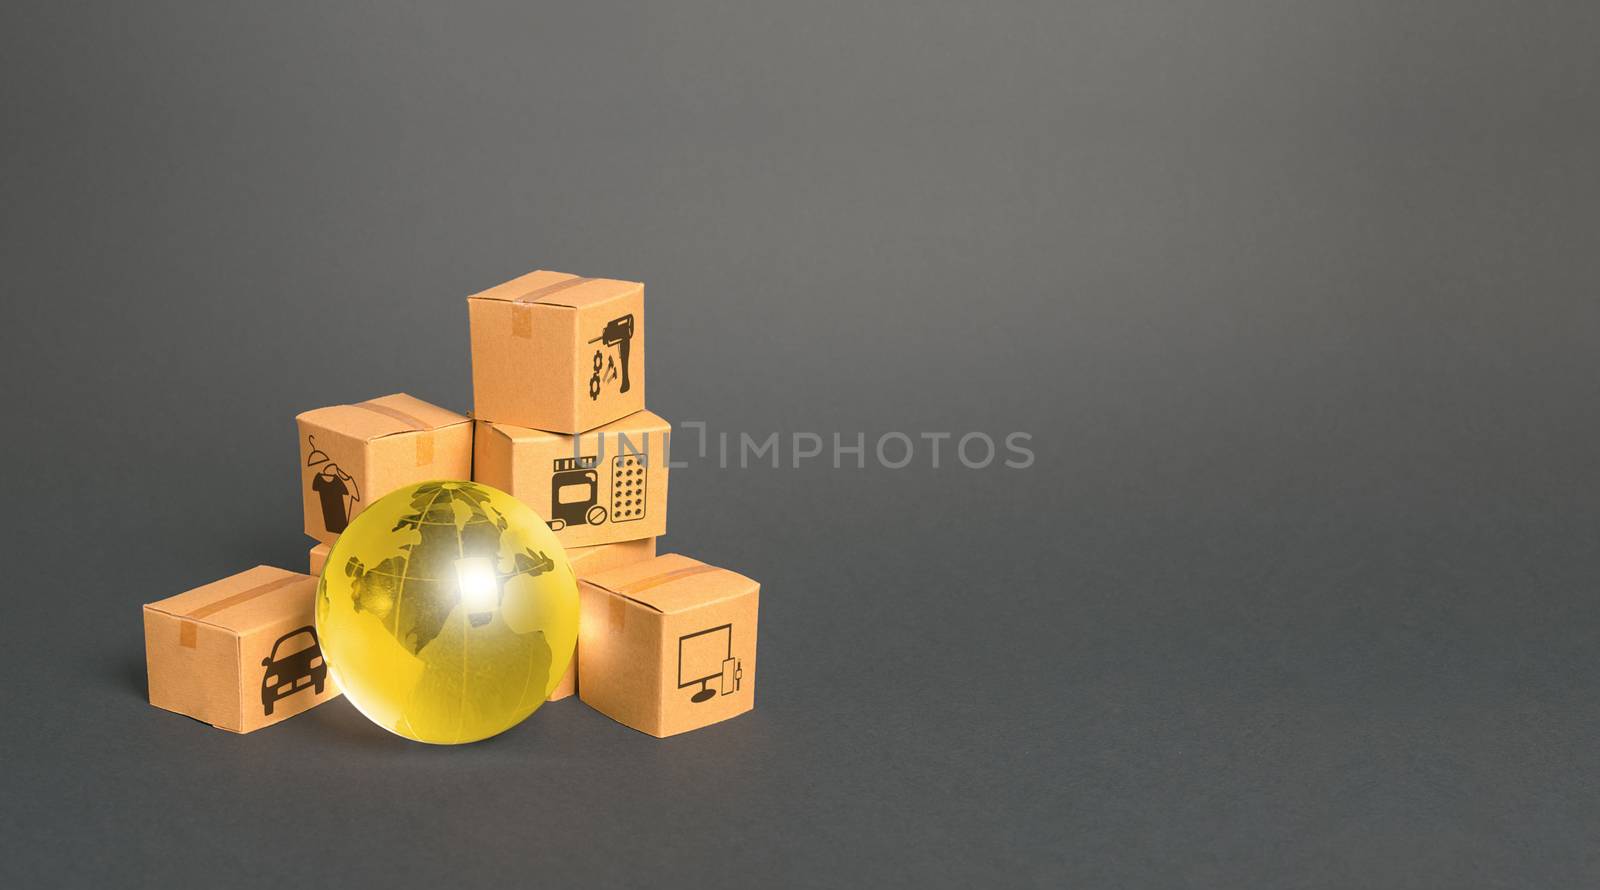 Golden glass globe and cardboard boxes. Globalization markets. Economics development. International world trade distribution. Delivery of goods, shipping. Global economy, import export freight traffic by iLixe48